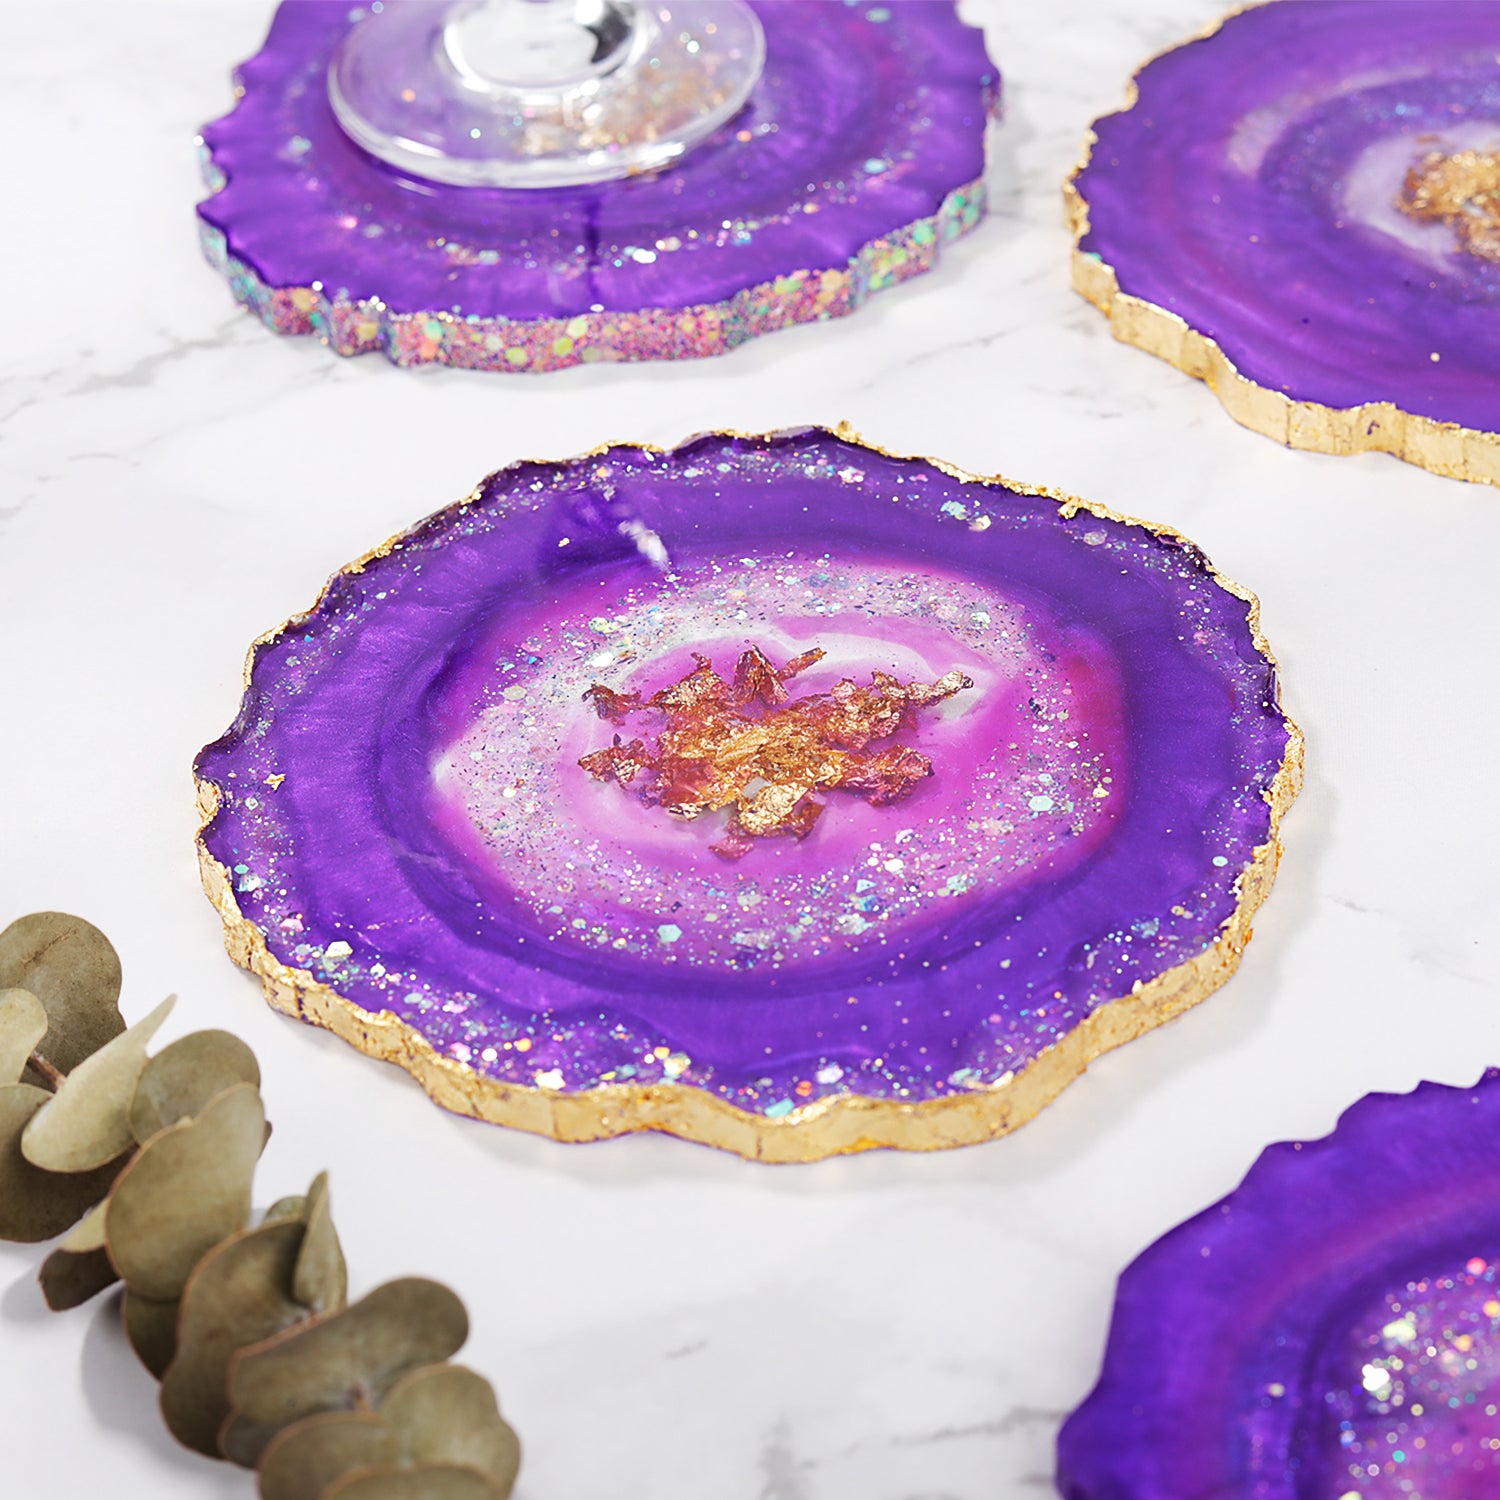 DIY Silicone Coaster Kit With Epoxy Resin And Geode Coasters